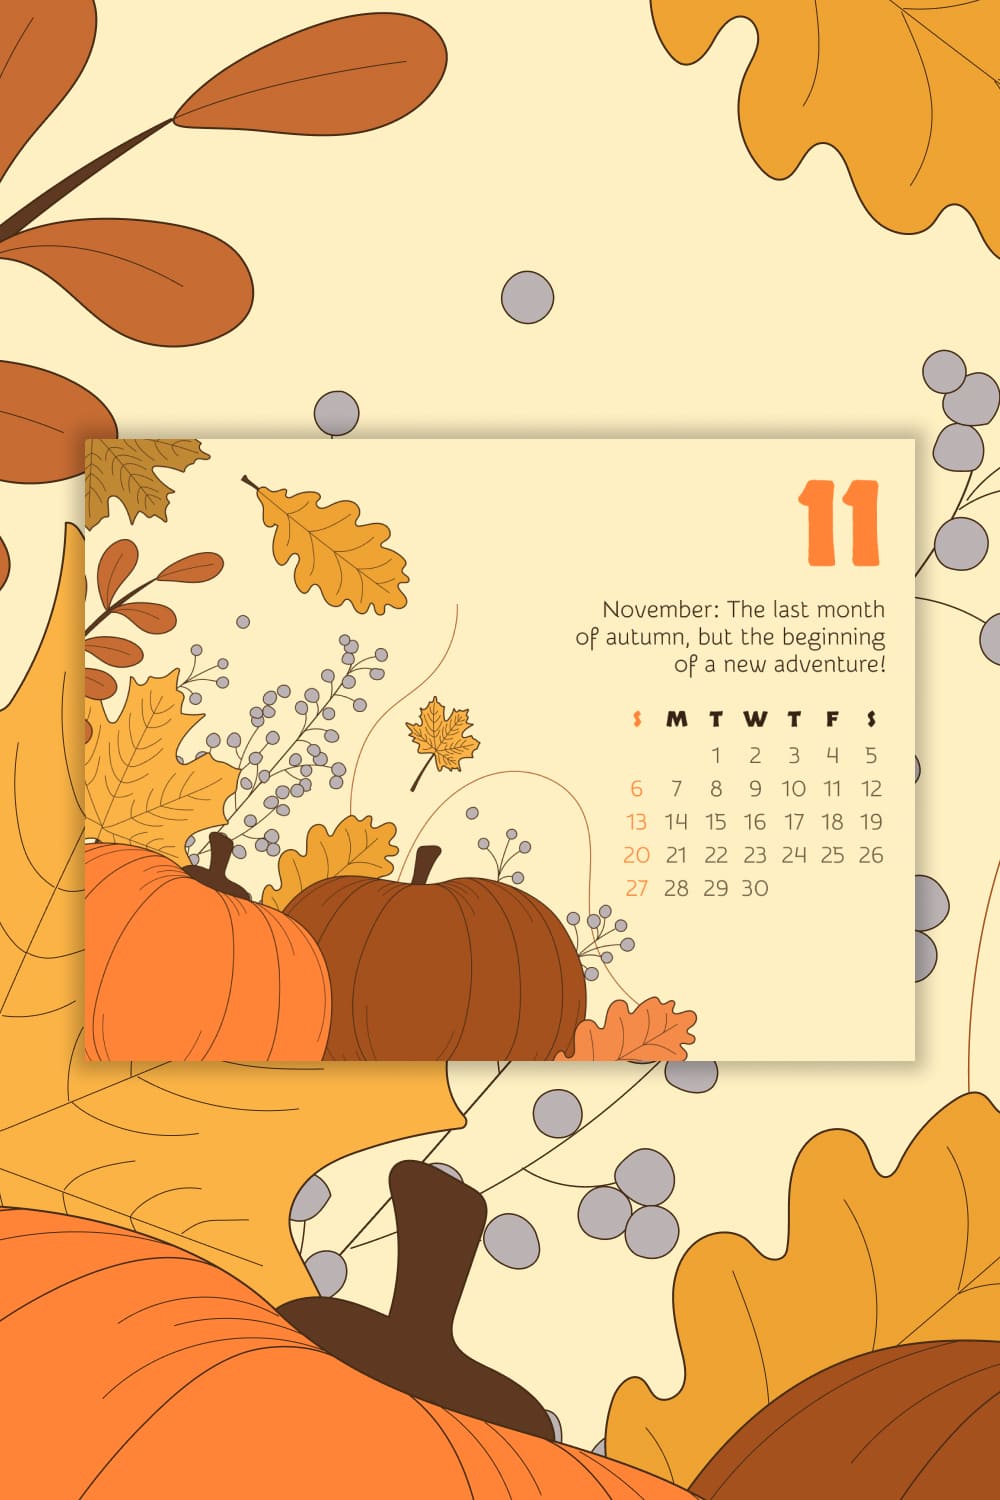 Calendar November in the picture size 1000x1500 for Pinterest.